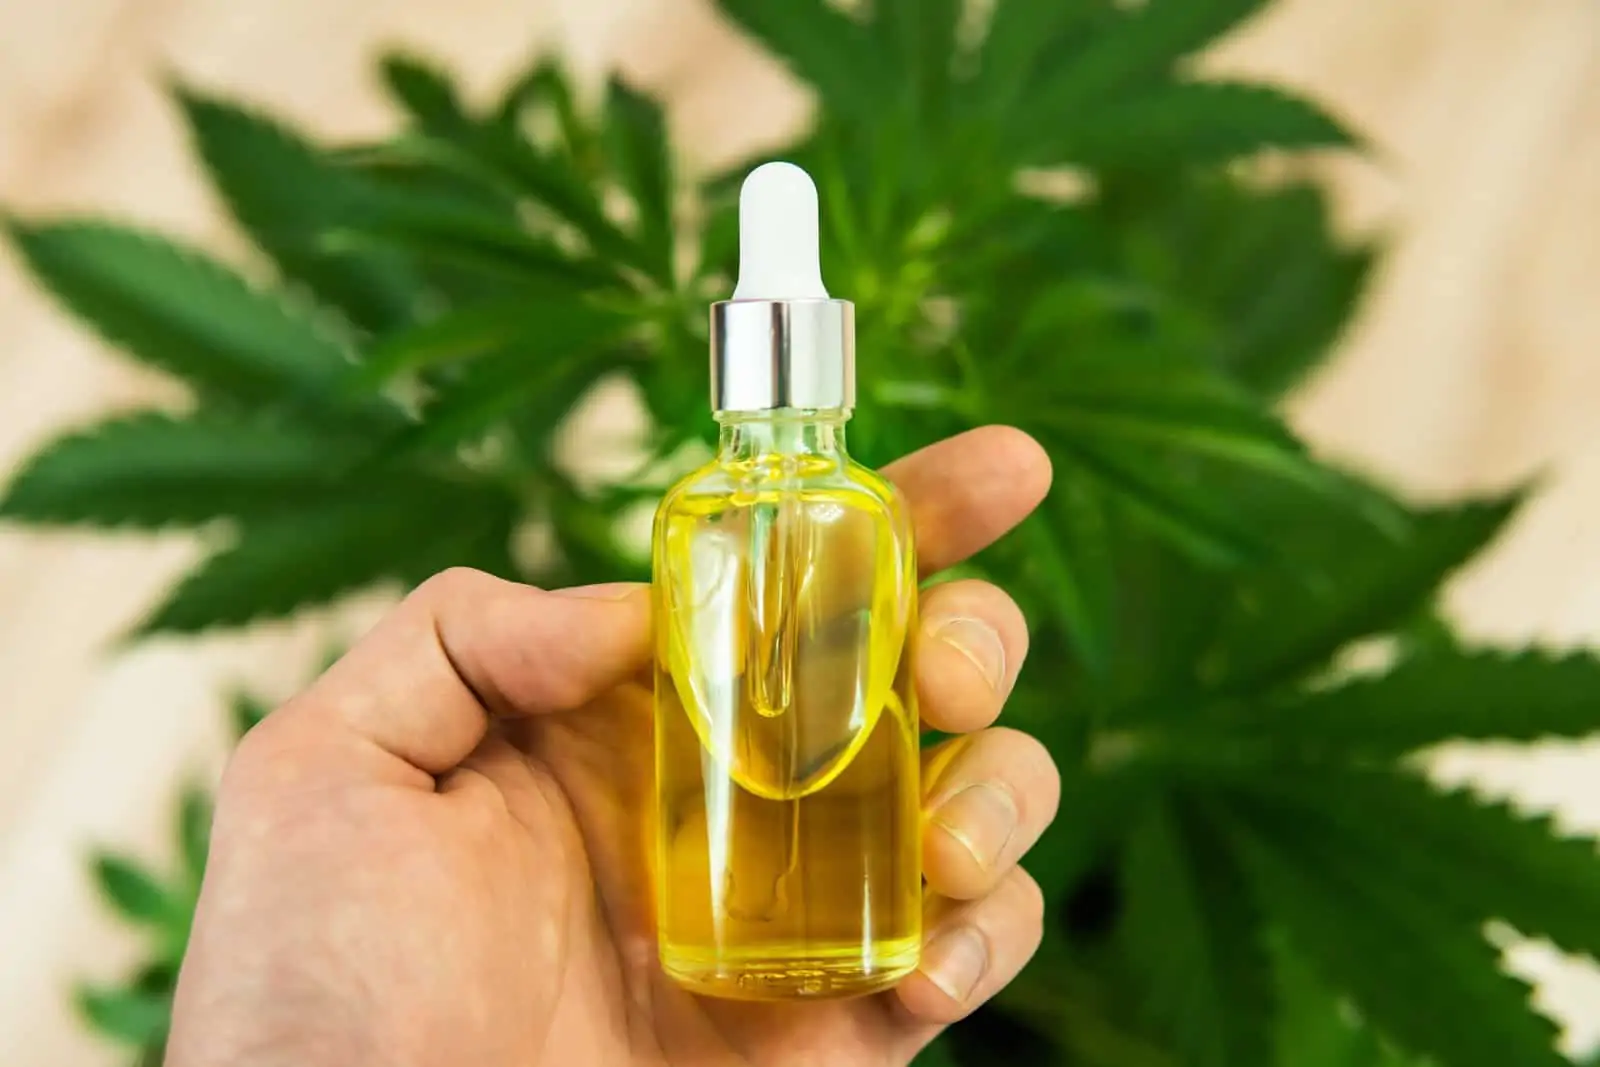 Learn How to Make CBD Oil